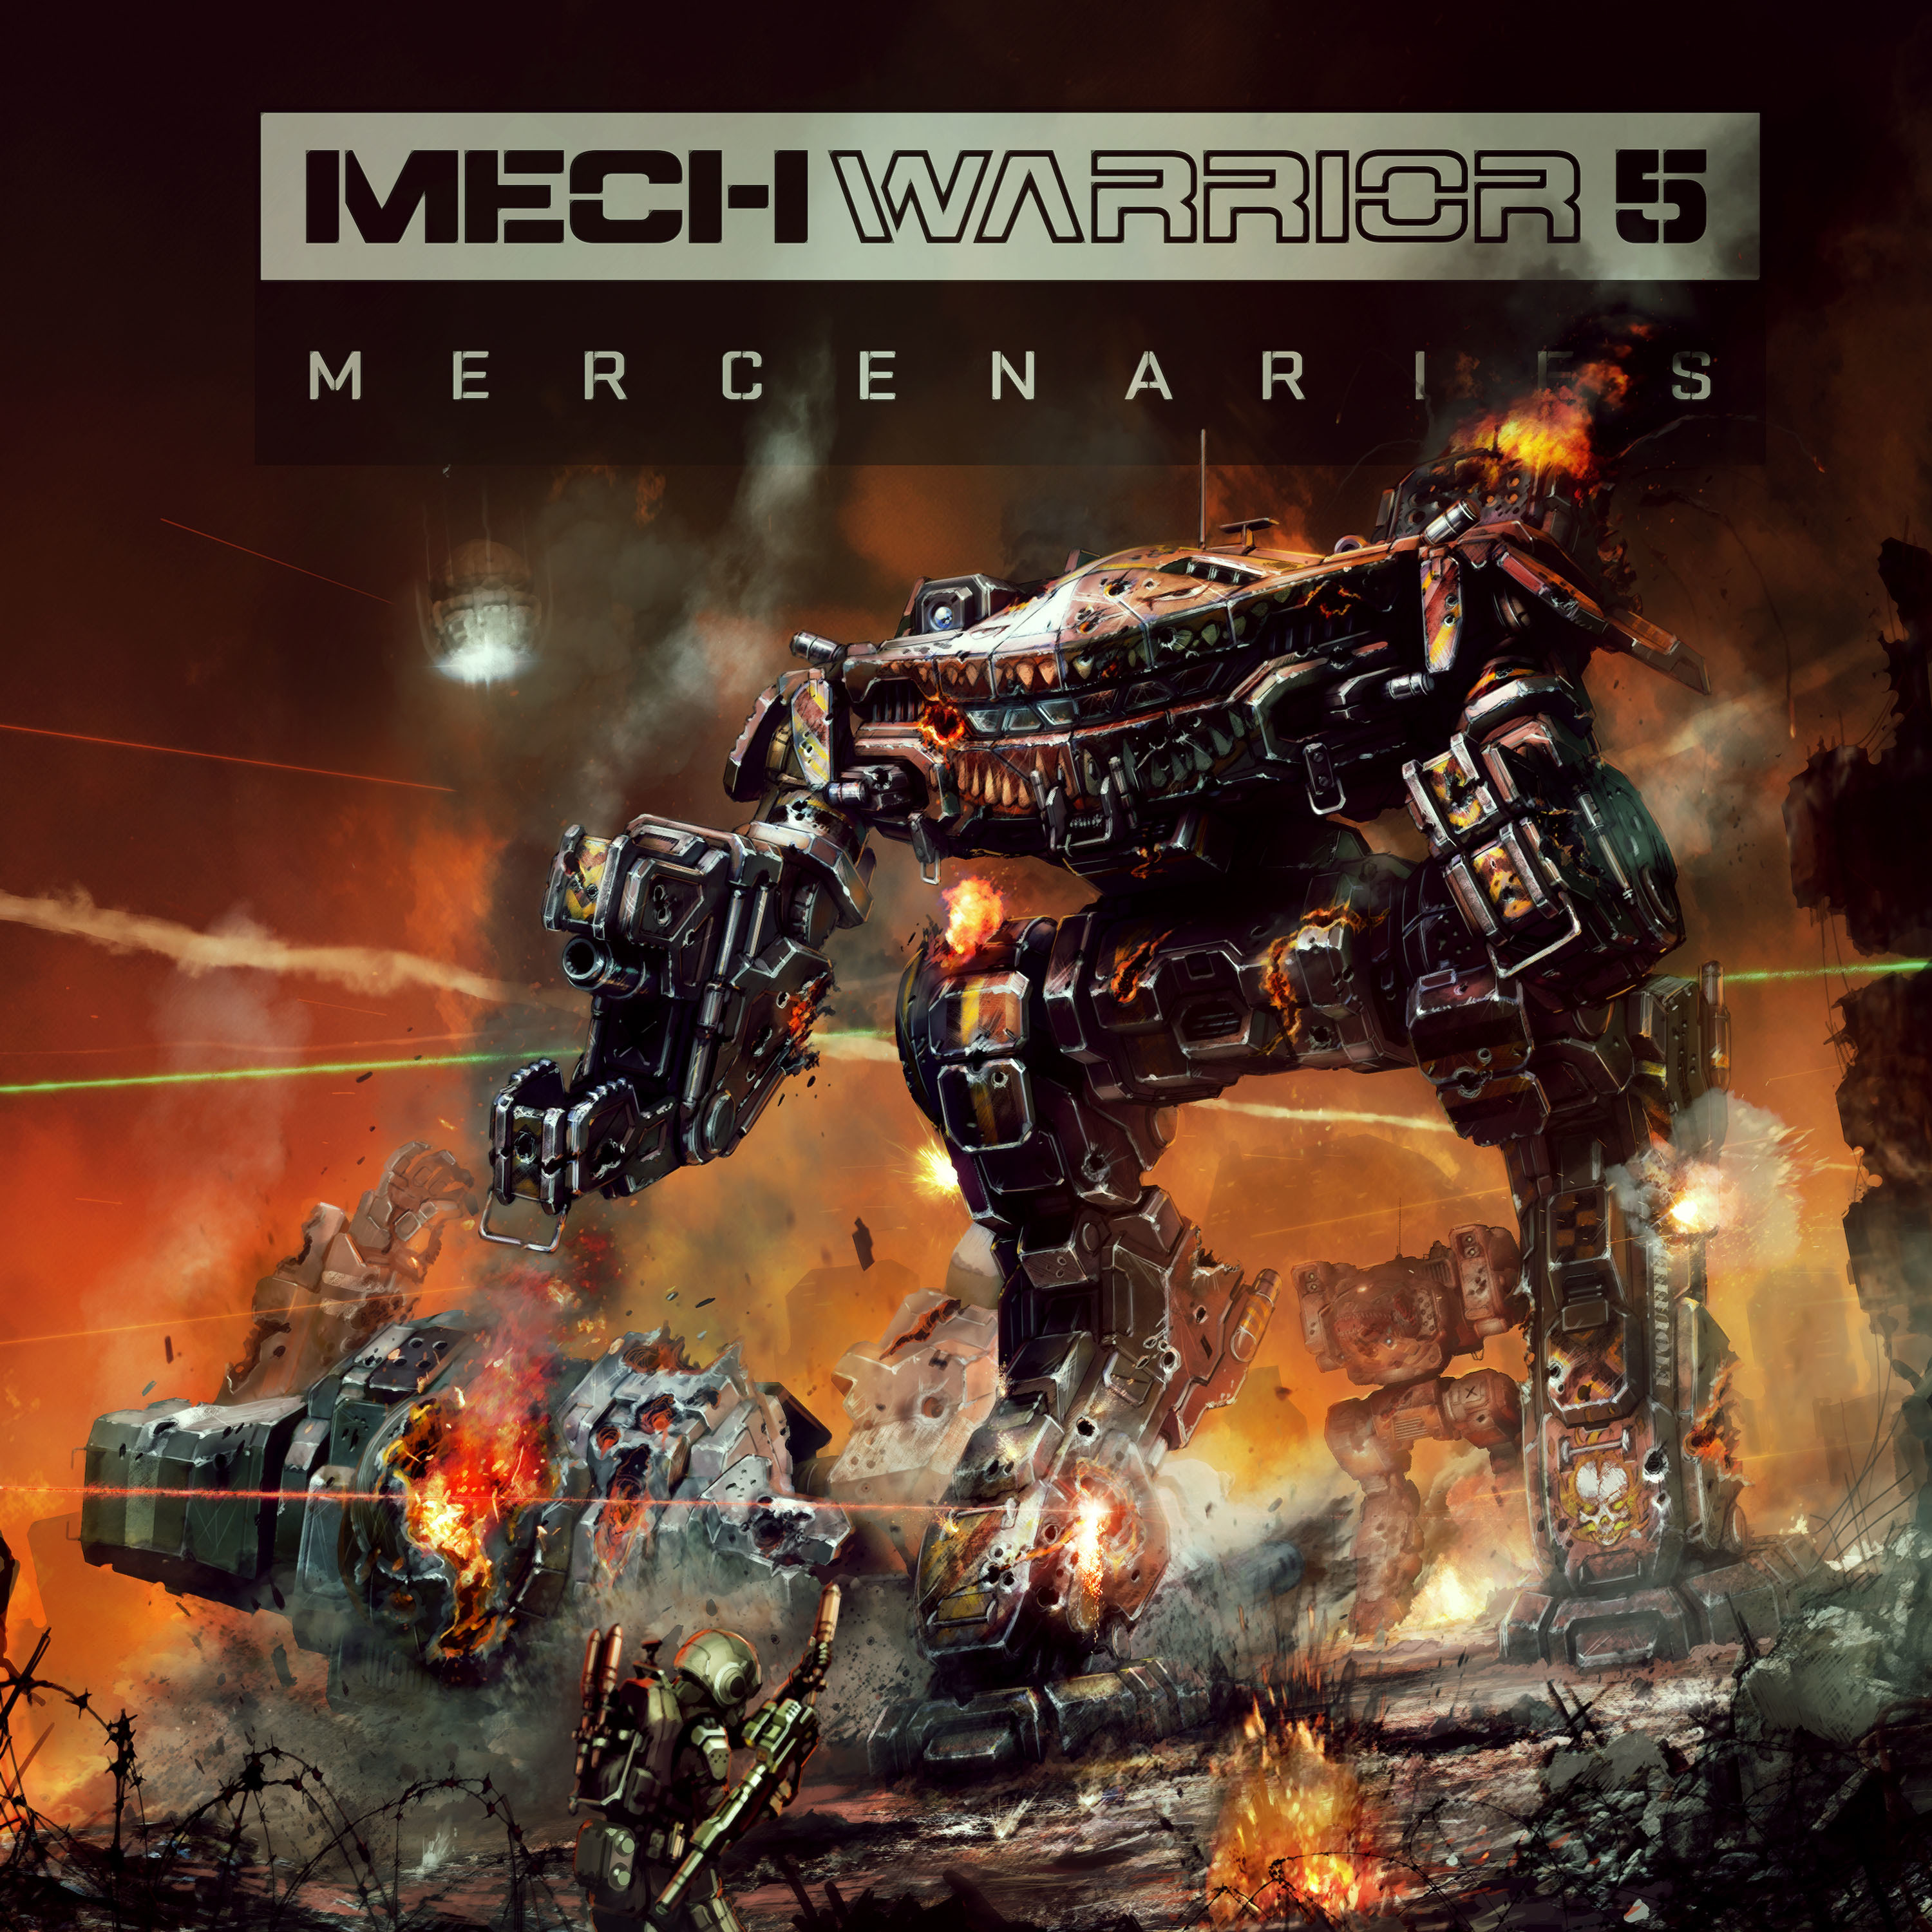 MechWarrior 5 Release Date Revealed; Read Our Latest Impressions Of